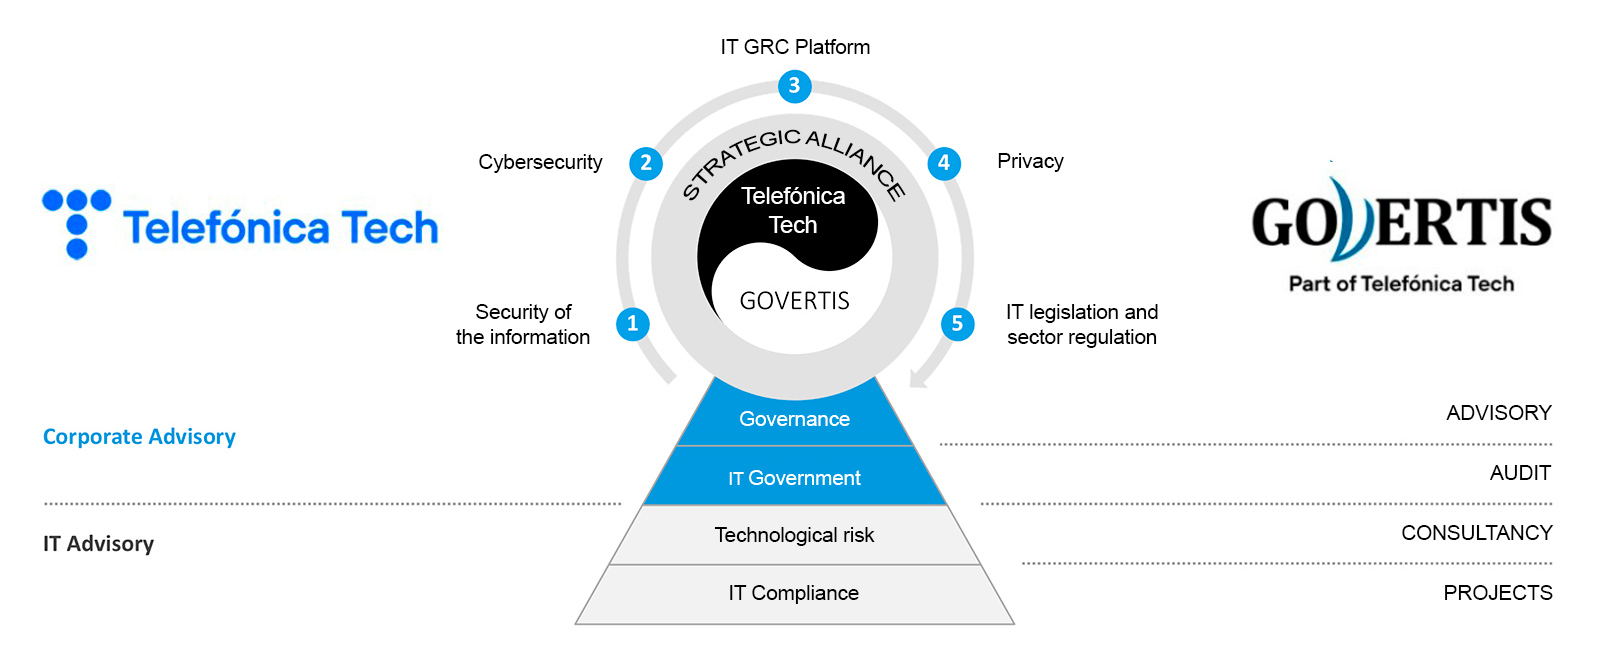 GOVERTIS - Experts in Cyber Security, Privacy, IT GRC and Legal Compliance 14